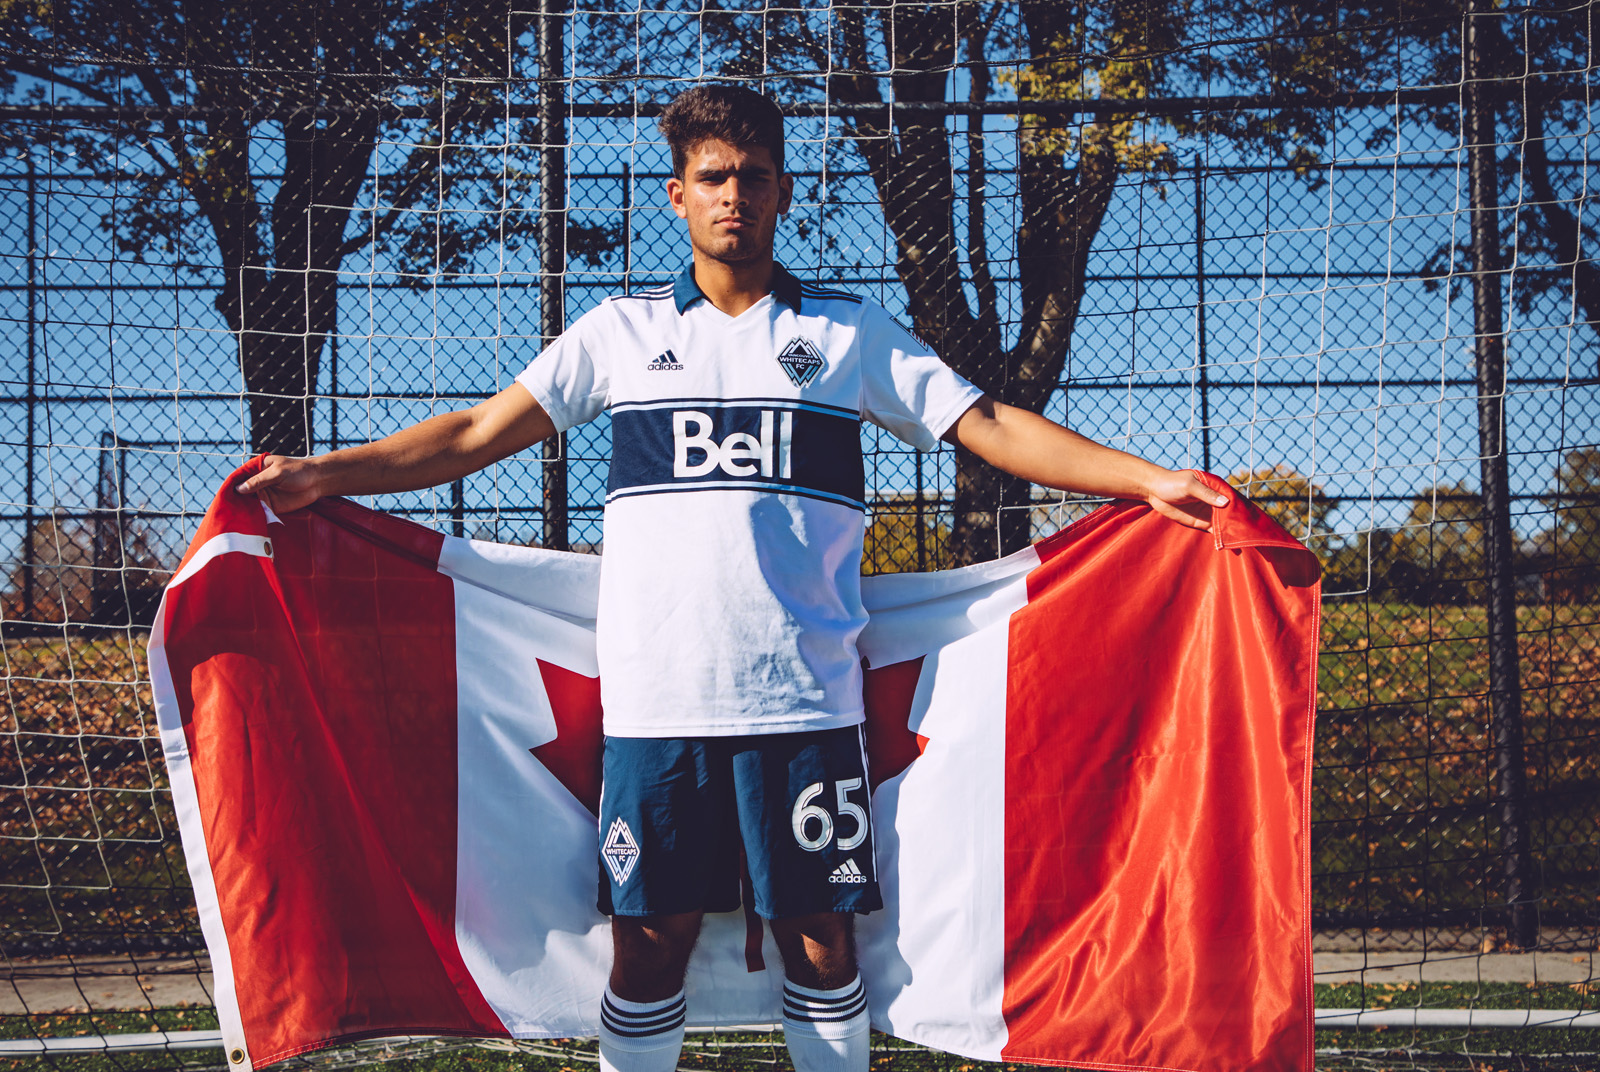 Vancouver Whitecaps 2019 Home Jersey Leaked?